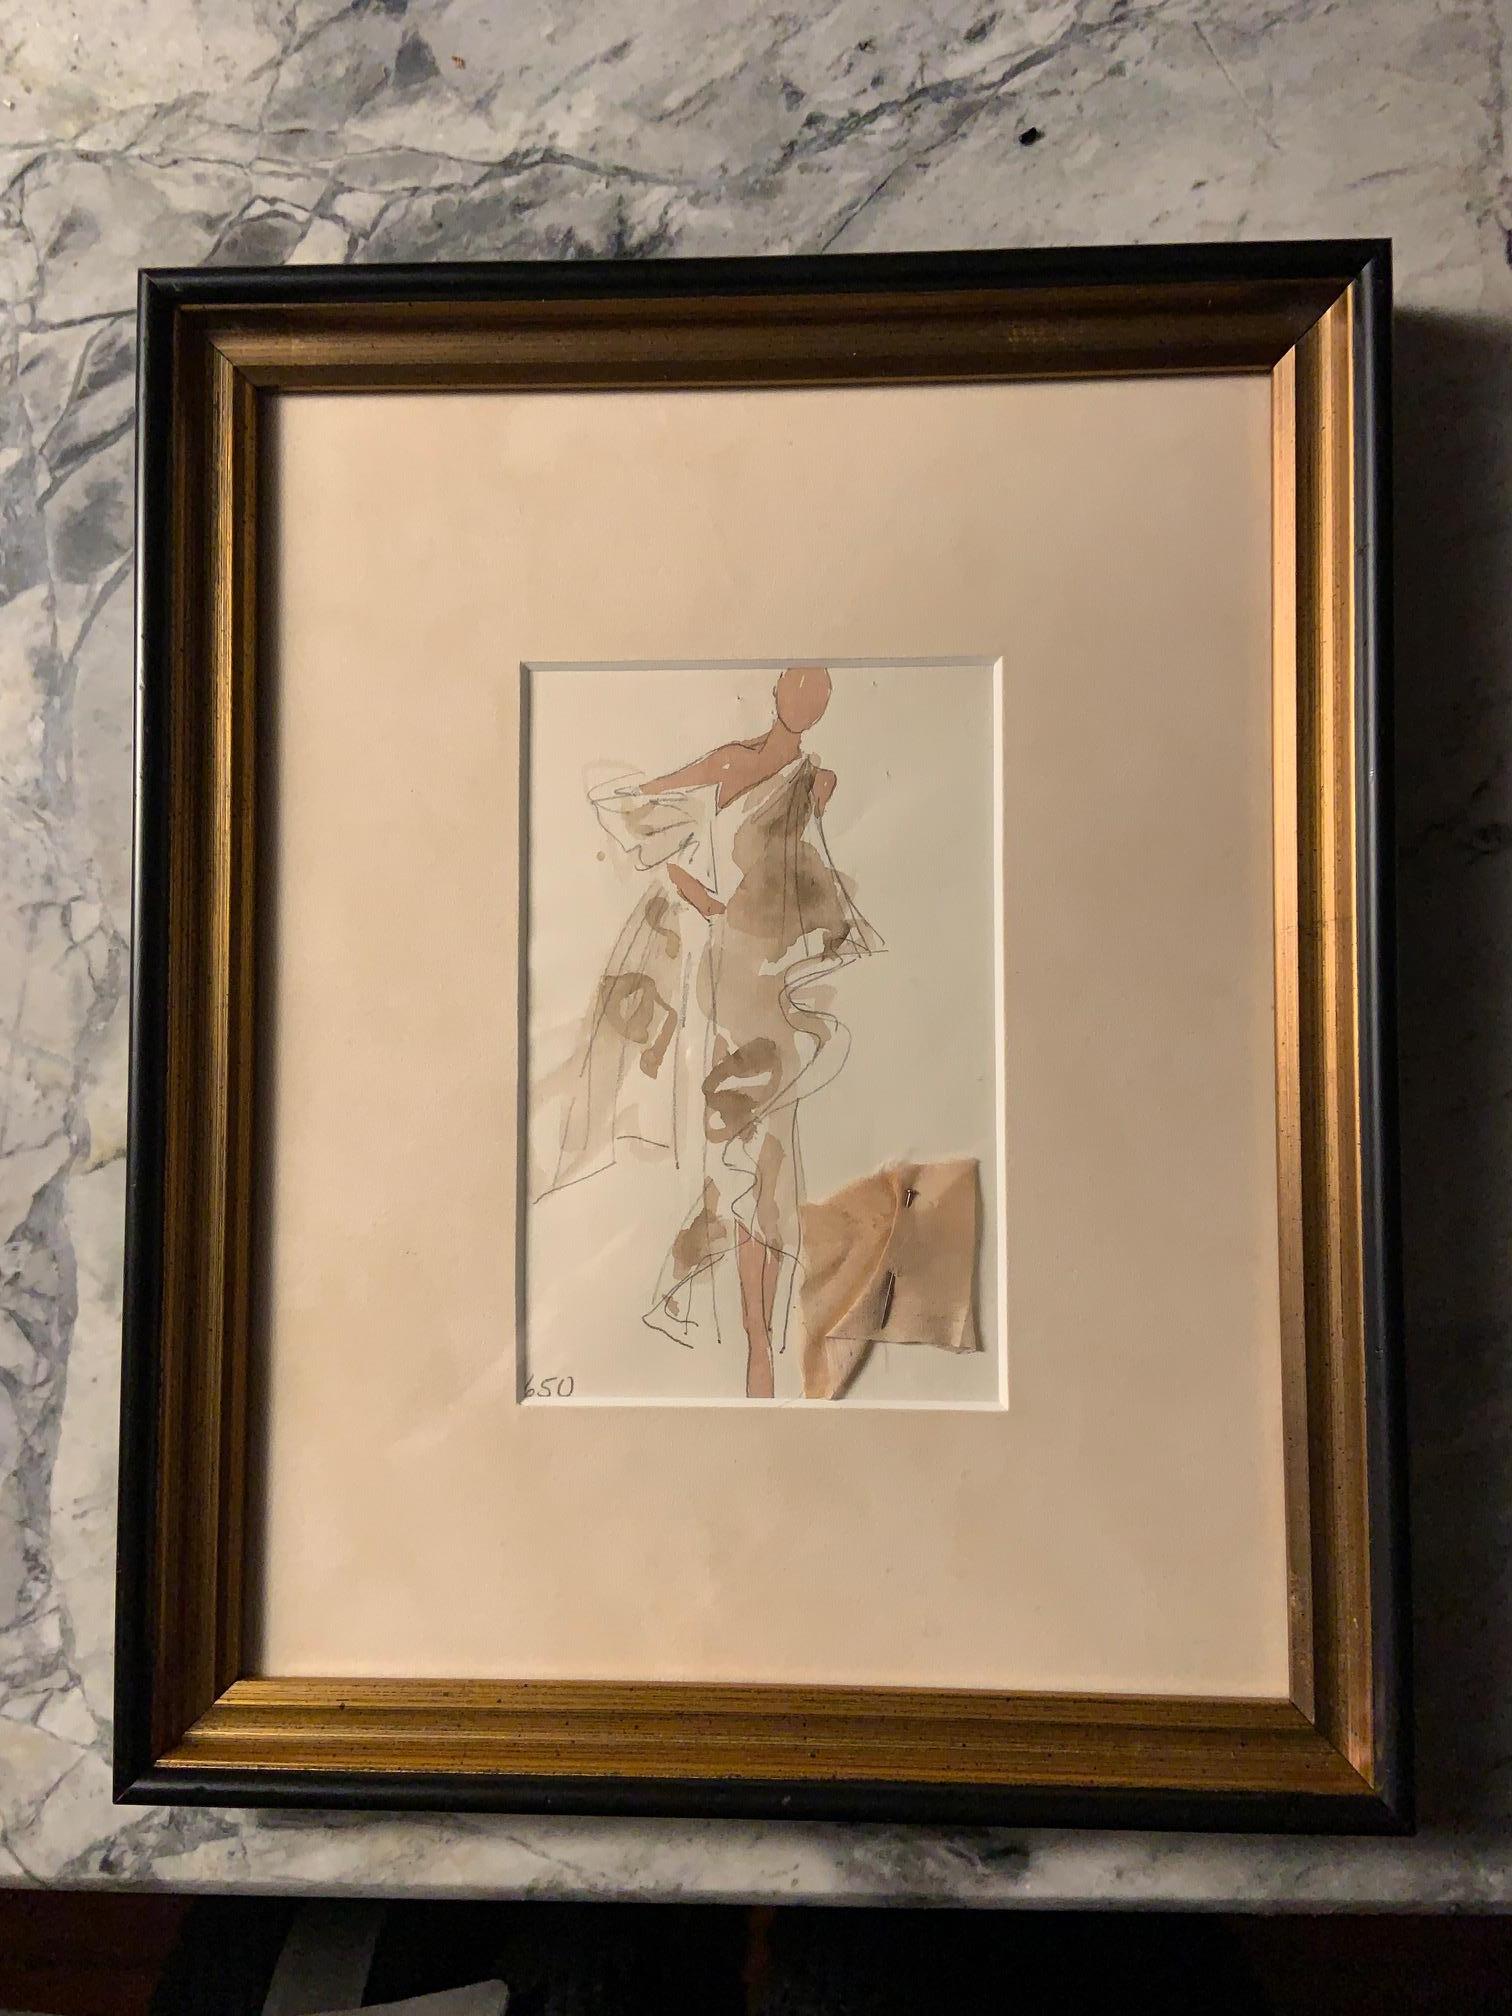 This is a rare original Joe Eula fashion sketch of a Halston cafe au lait chiffon evening dress design, complete with an attached fabric swatch. This drawing is from an estate auction of personal possessions of Martha Graham, a close friend of